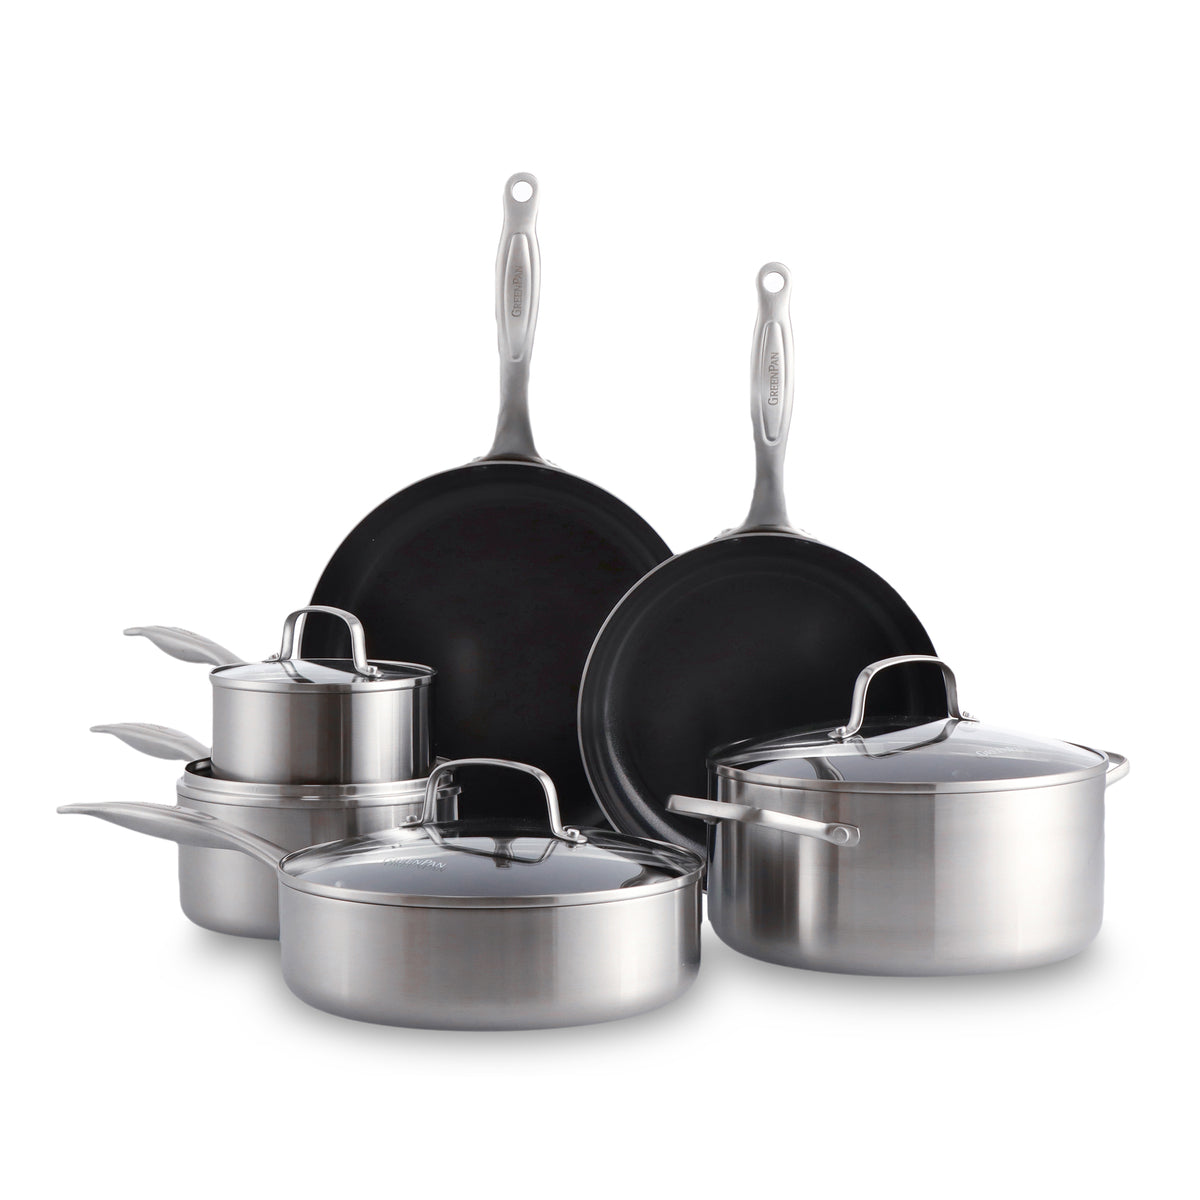 GreenPan 10-pc Stainless Steel Ceramic Non-Stick Tri-ply Cookware Set 